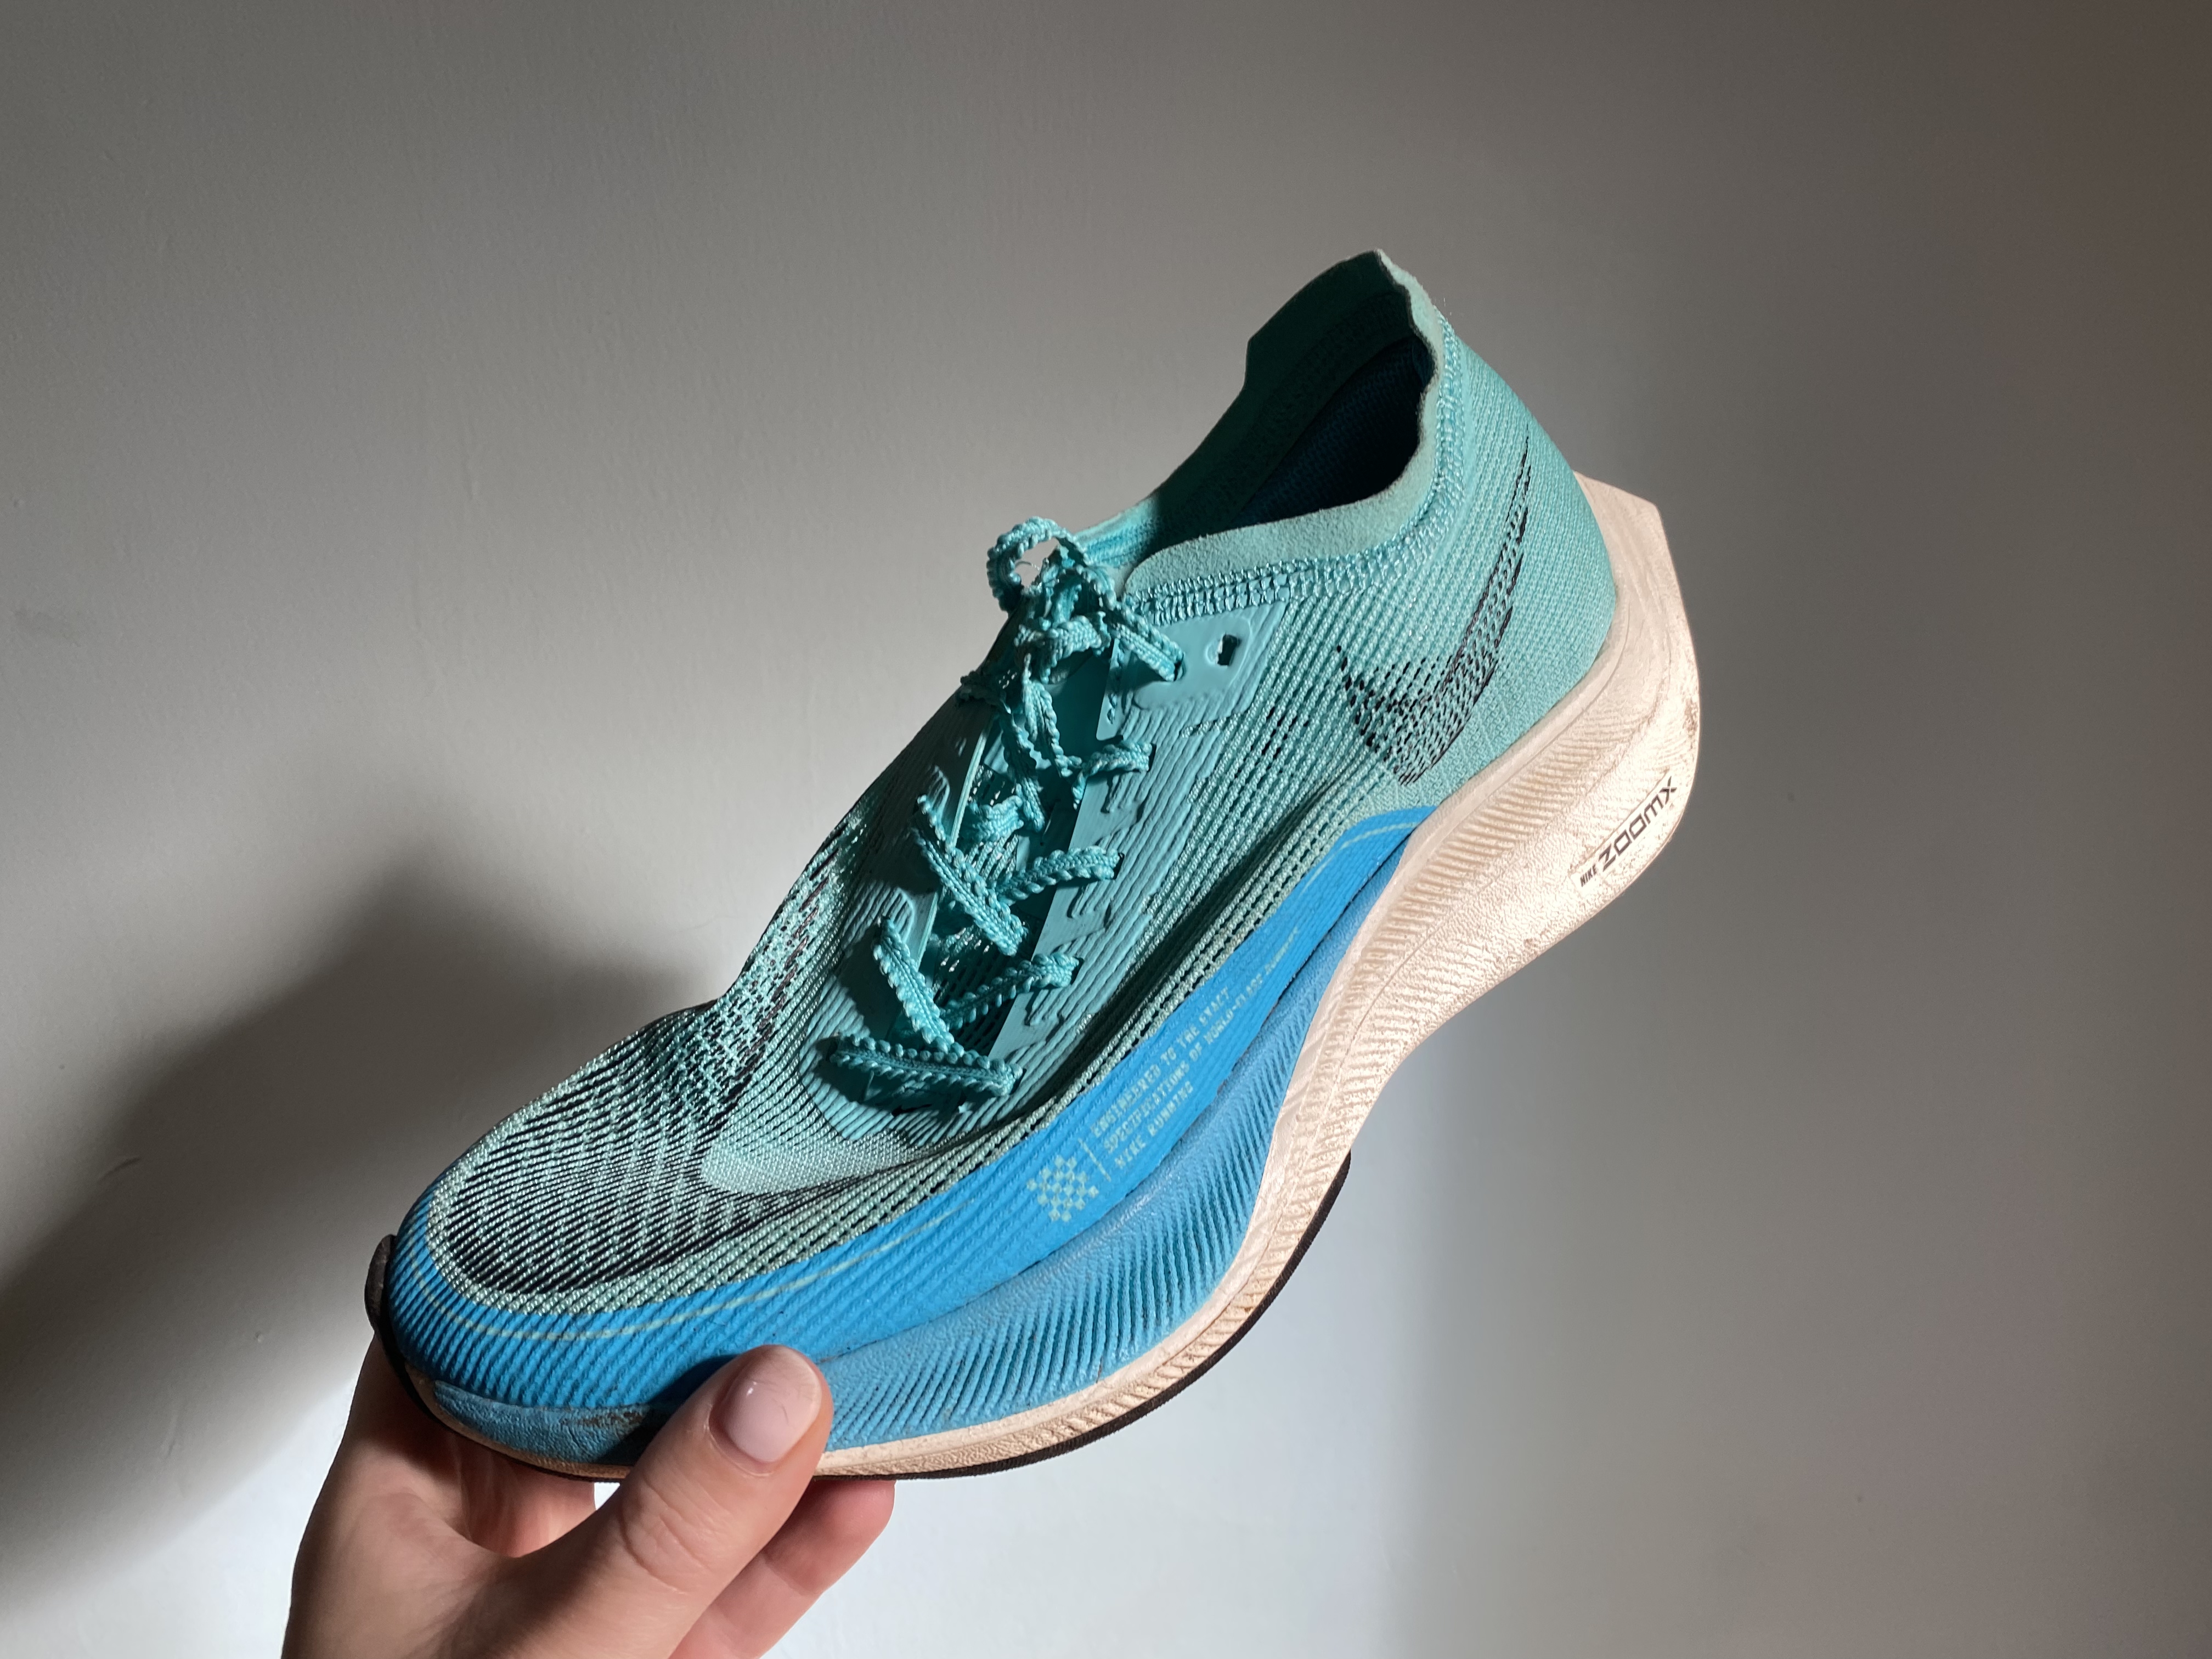 A photo of the Nike Vaporfly Next% 2